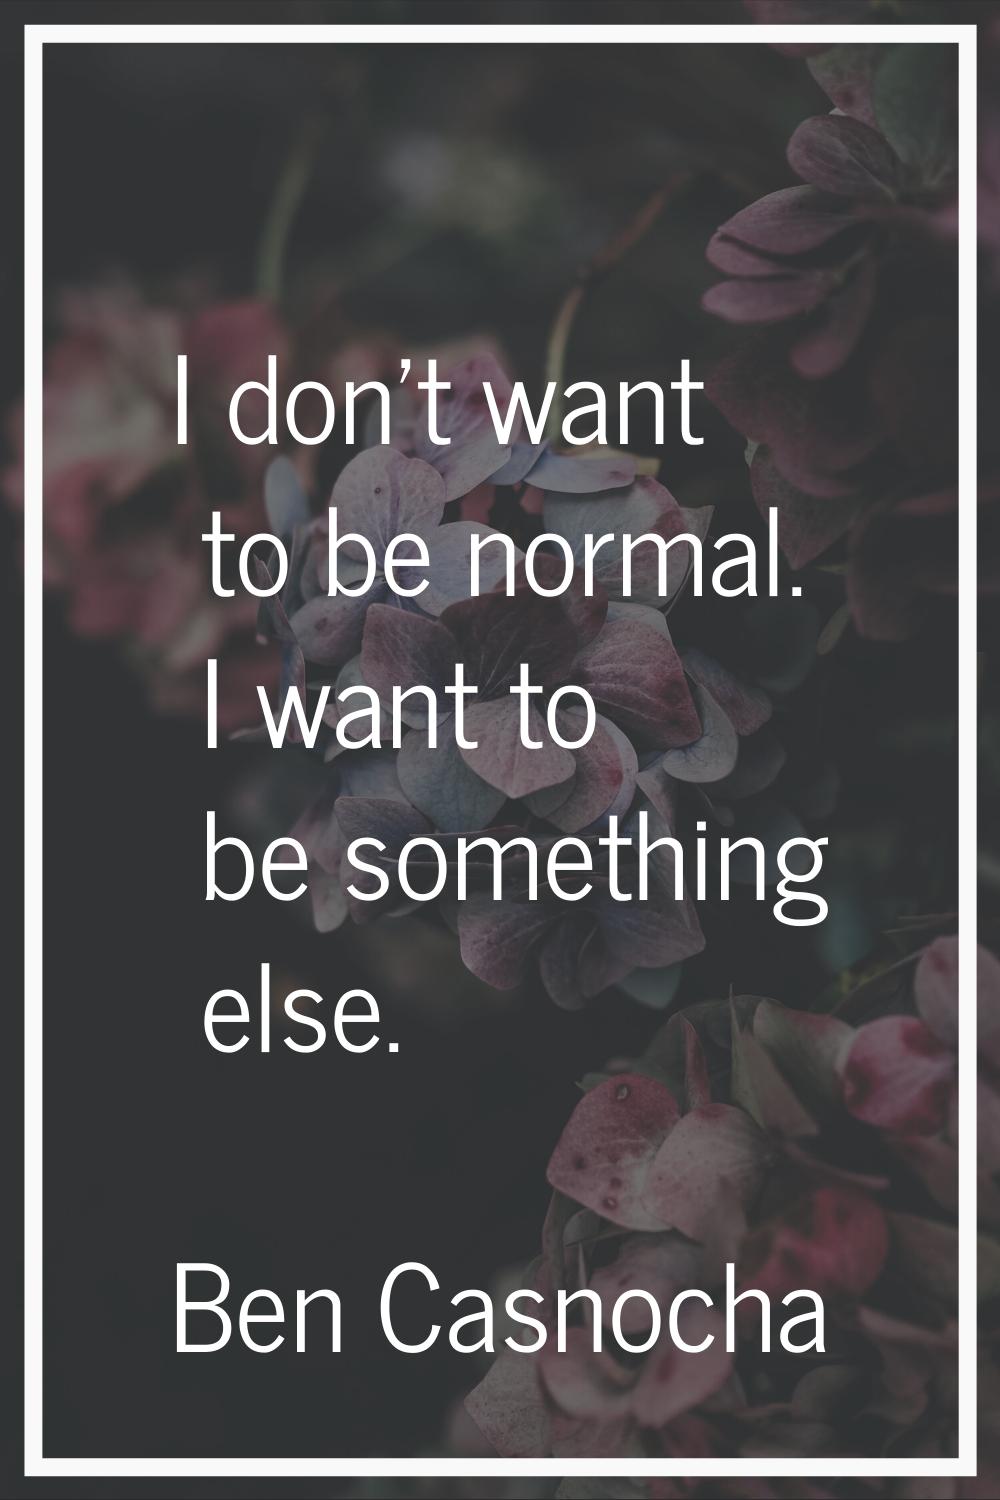 I don't want to be normal. I want to be something else.